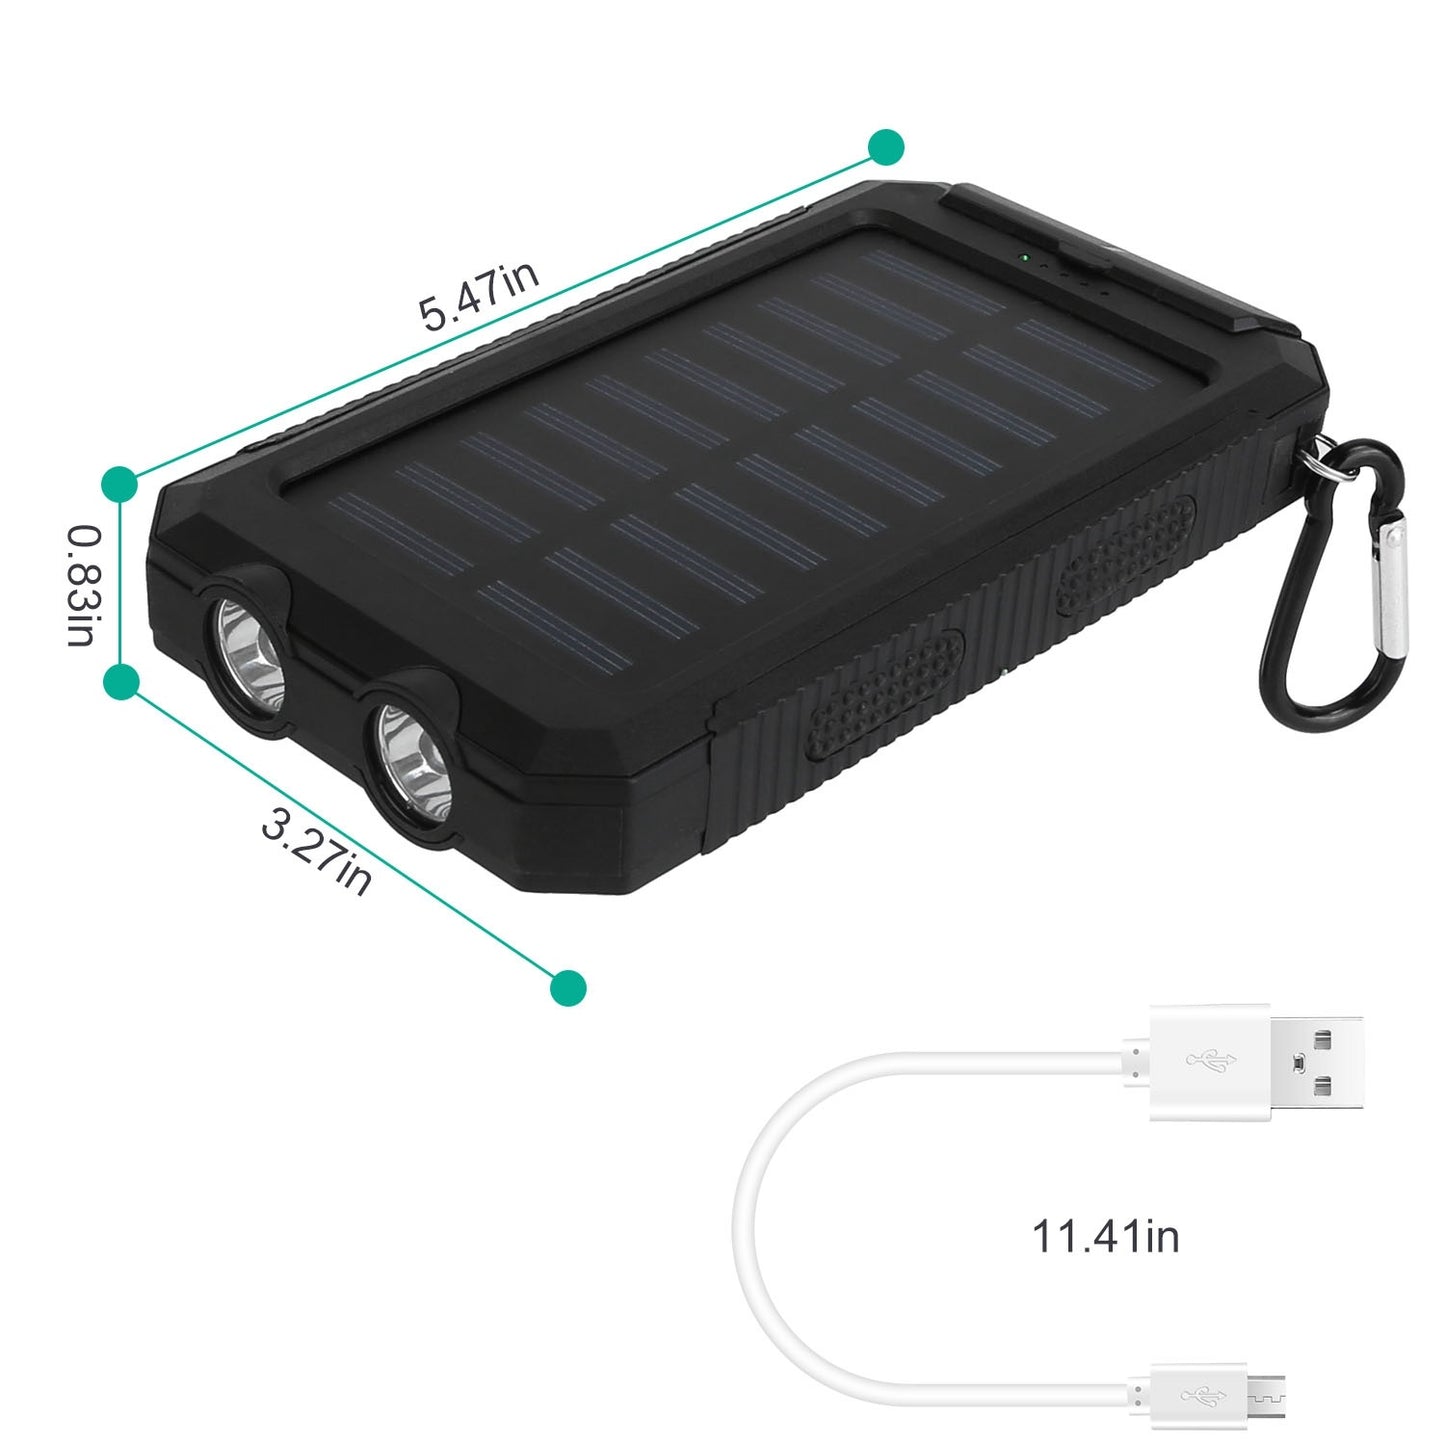 Portable 10000mAh Solar Charger Power Bank for Camping with Dual USB Ports, Battery Indicators, SOS LED Lights & Built-in Compass